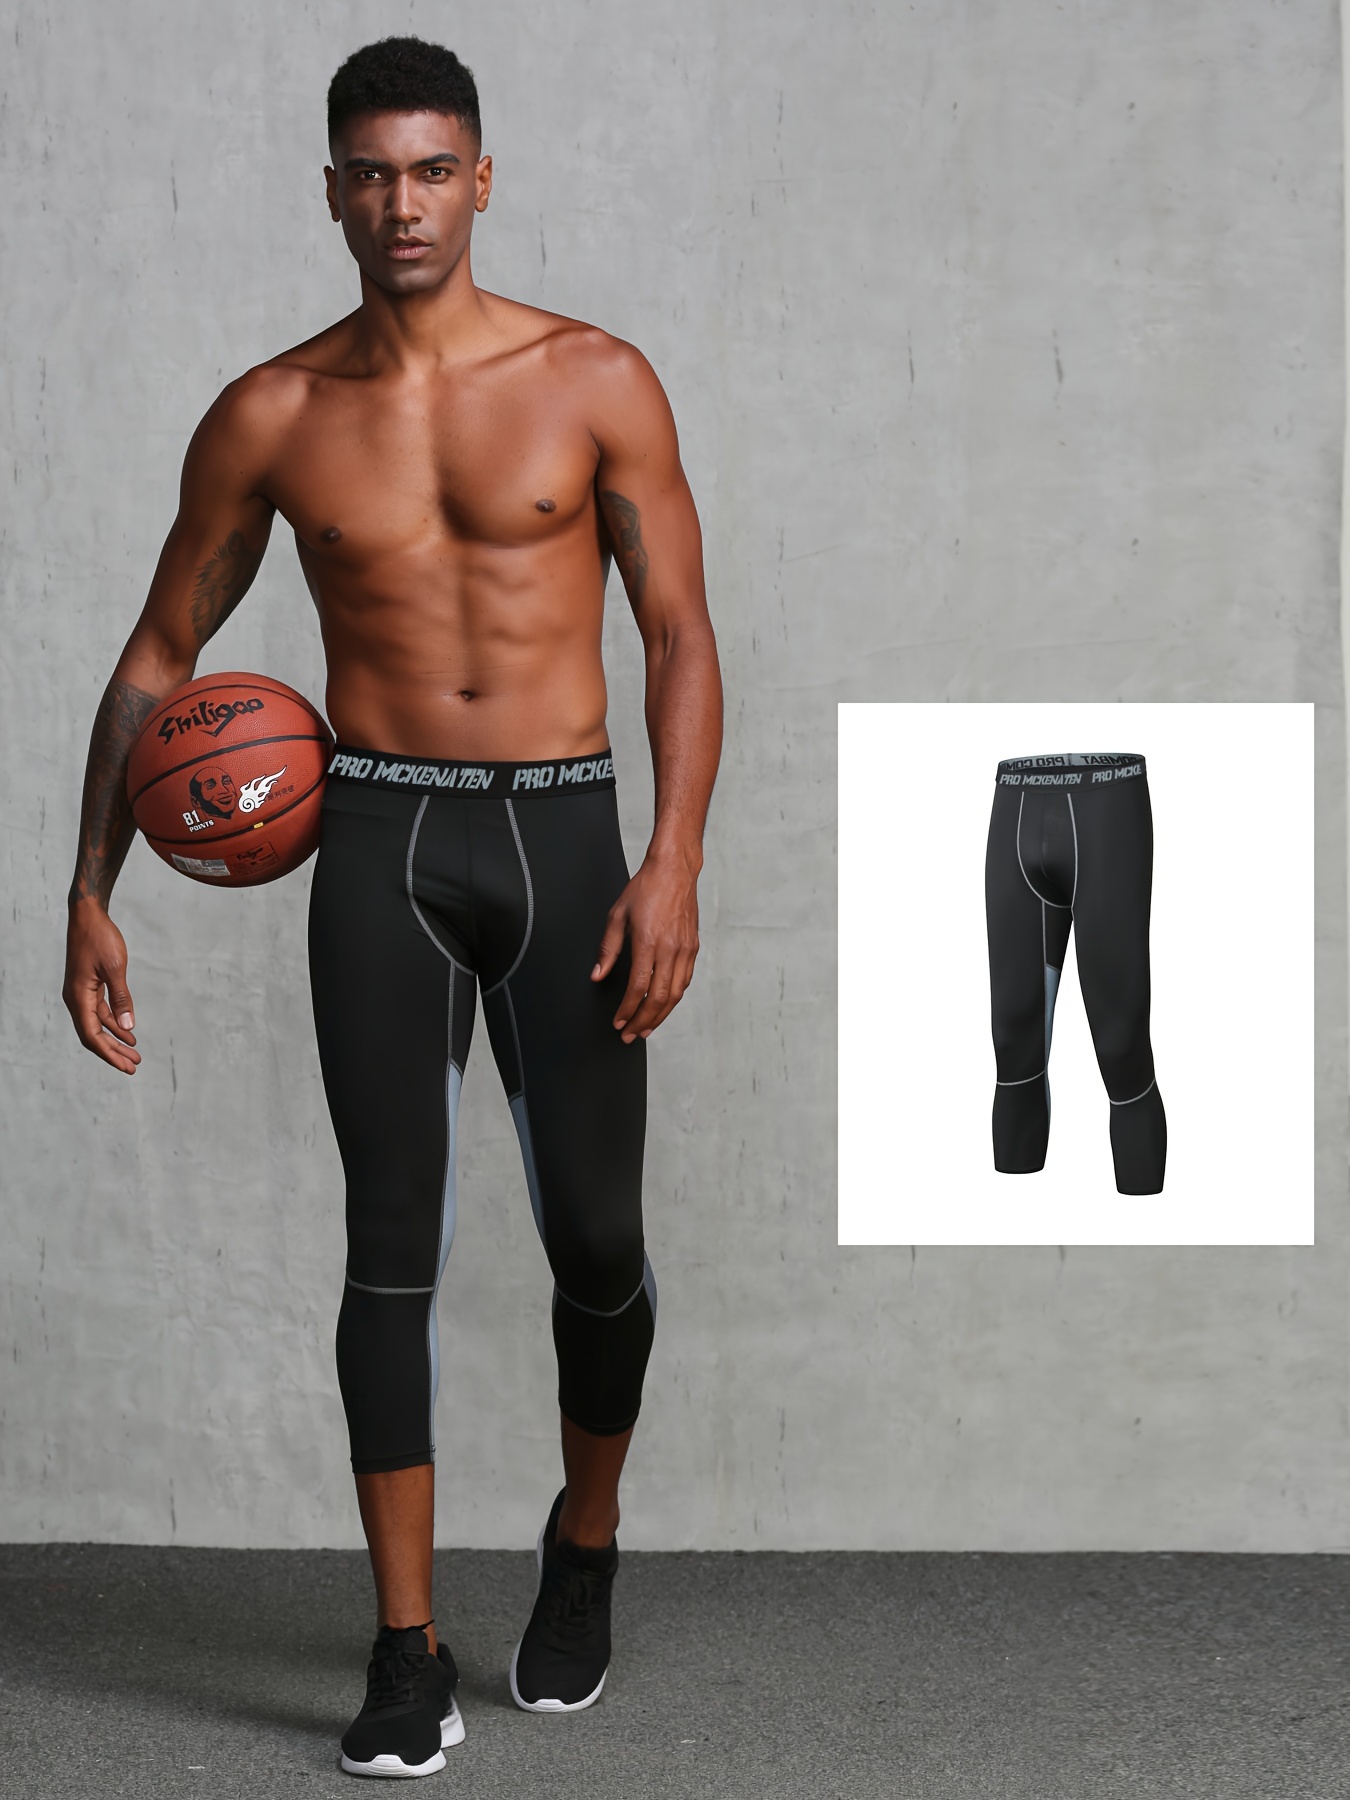 Boys Compression Pants 2 In 1 Sports Pants, Kids Basketball Shorts And  Leggings For Training Basketball Running